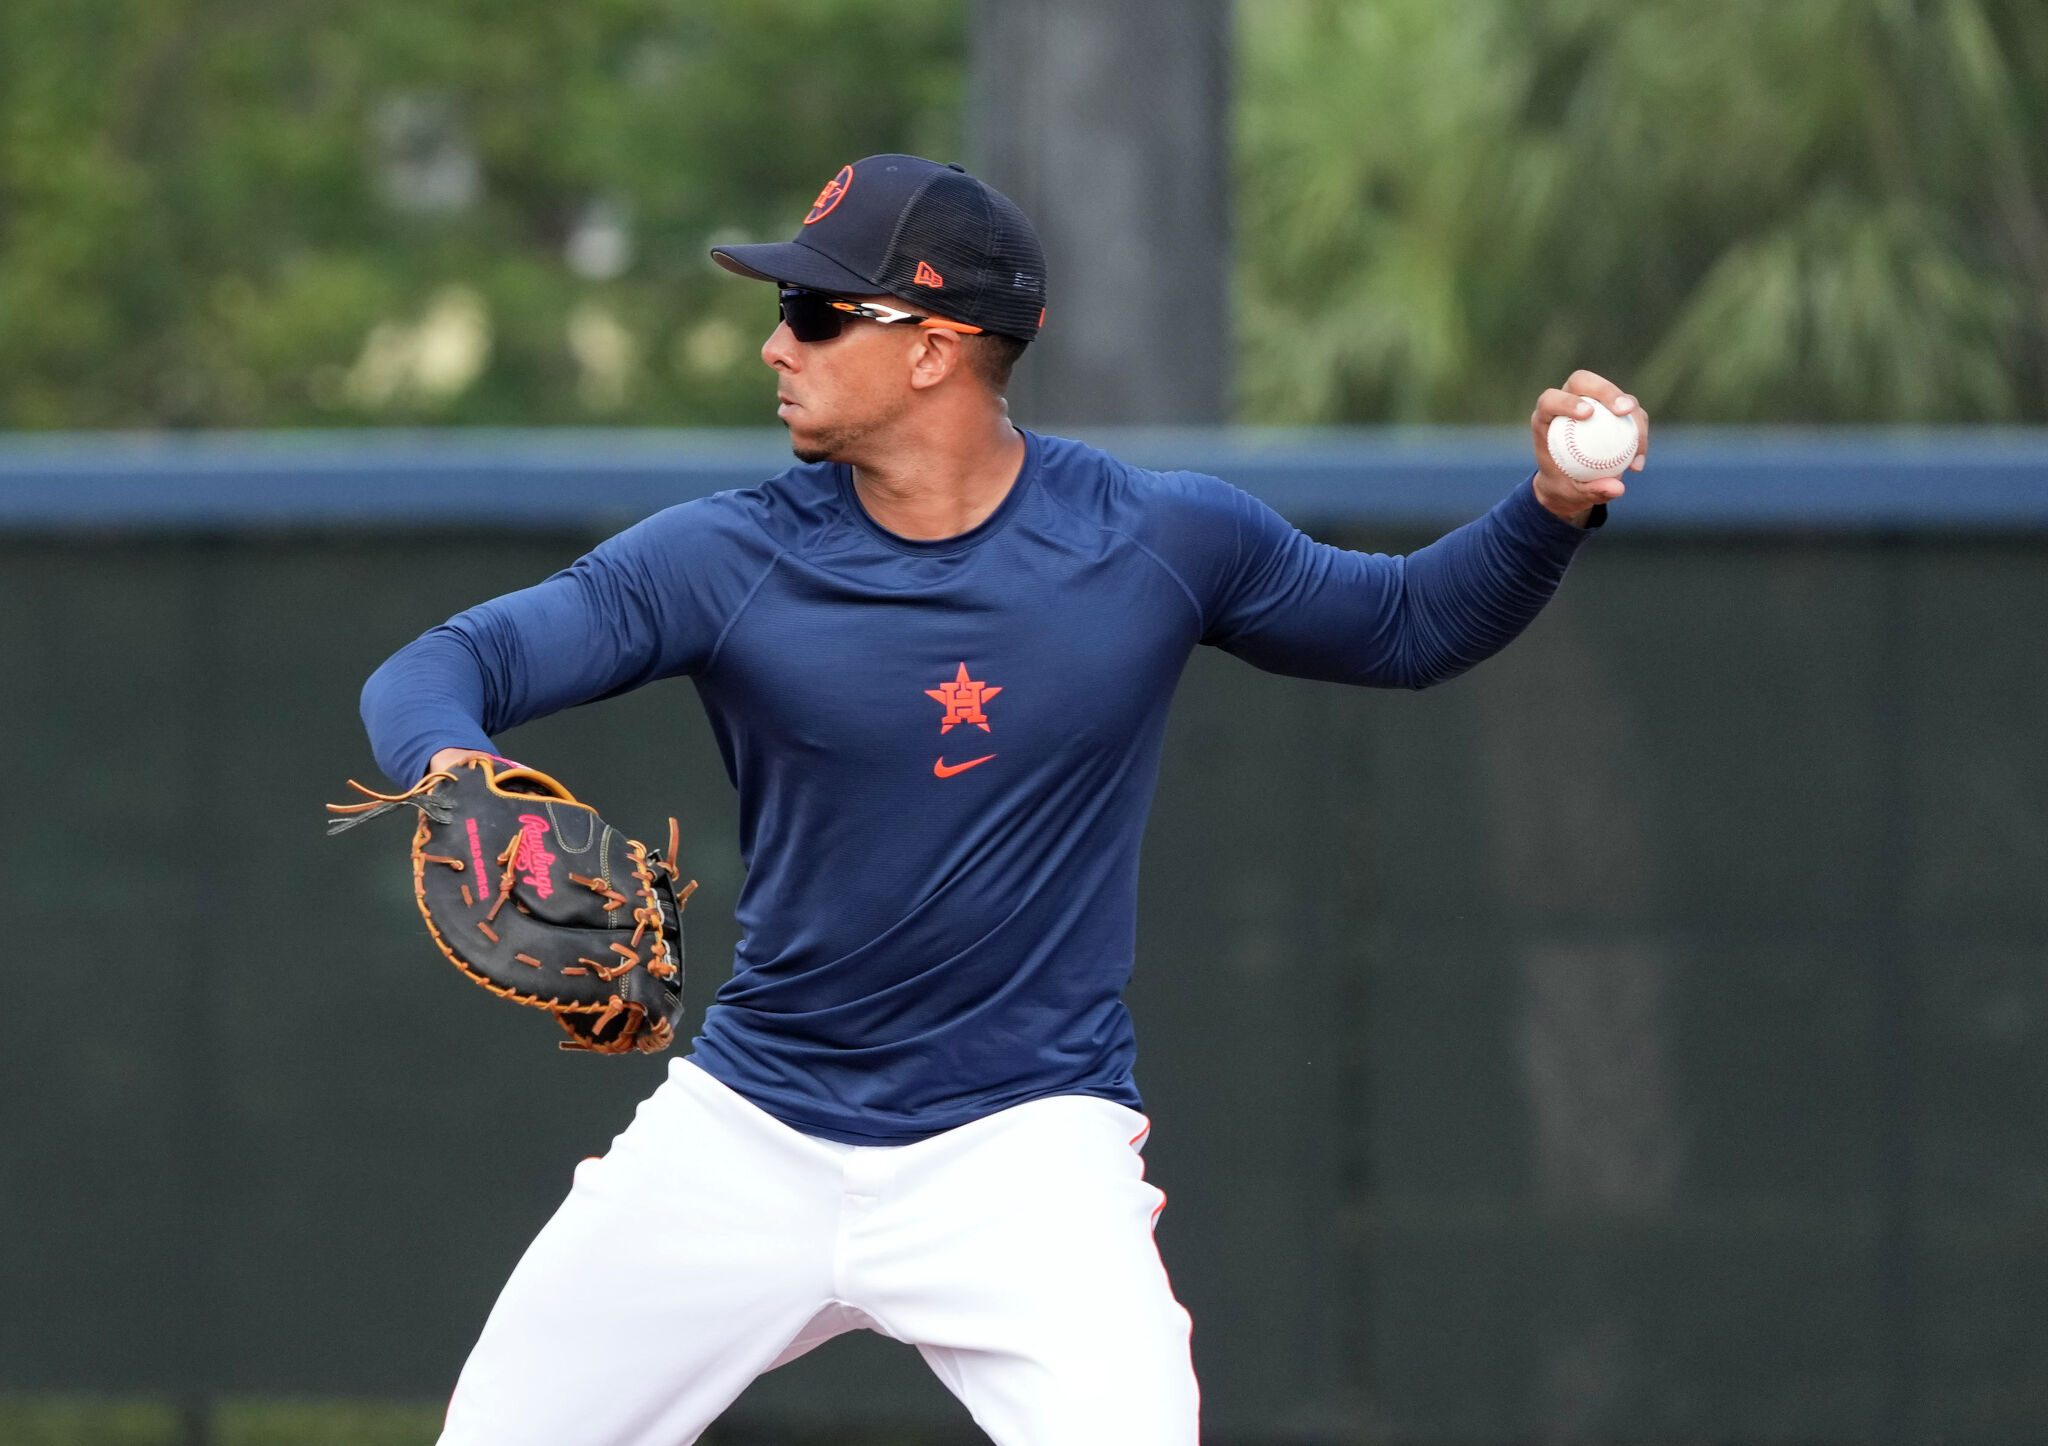 Astros OF Michael Brantley, working back from shoulder surgery, to